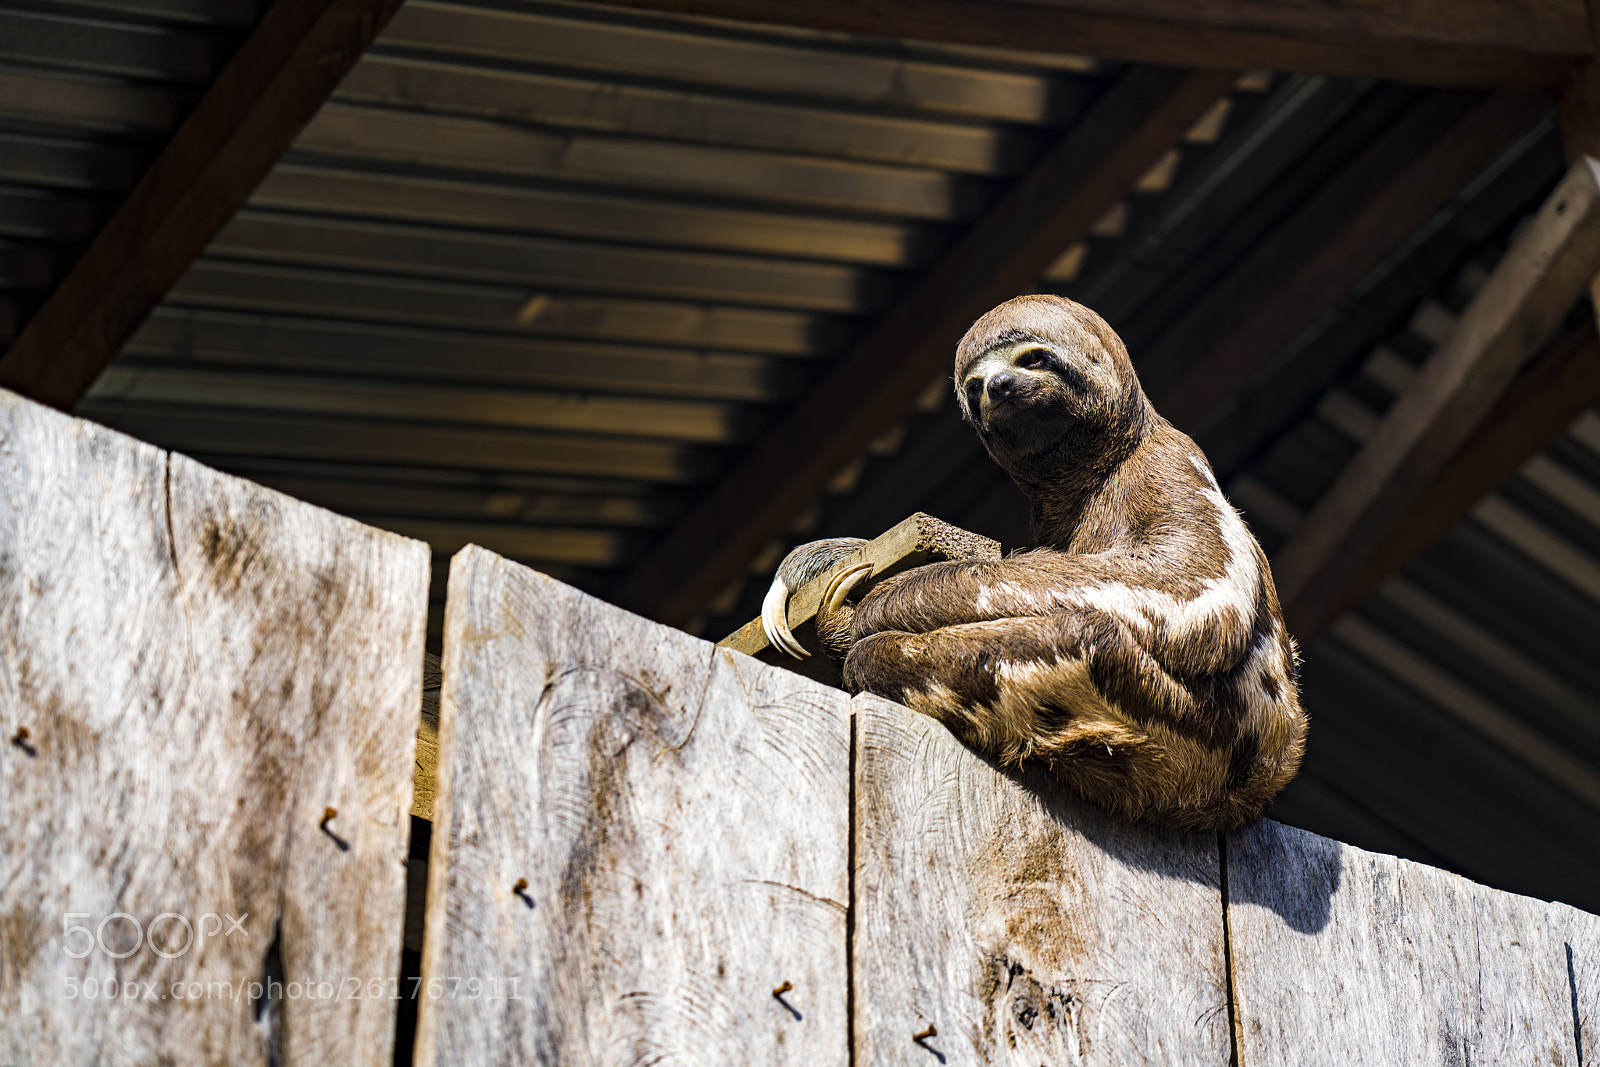 Sony a7R III sample photo. Sloth on house in photography